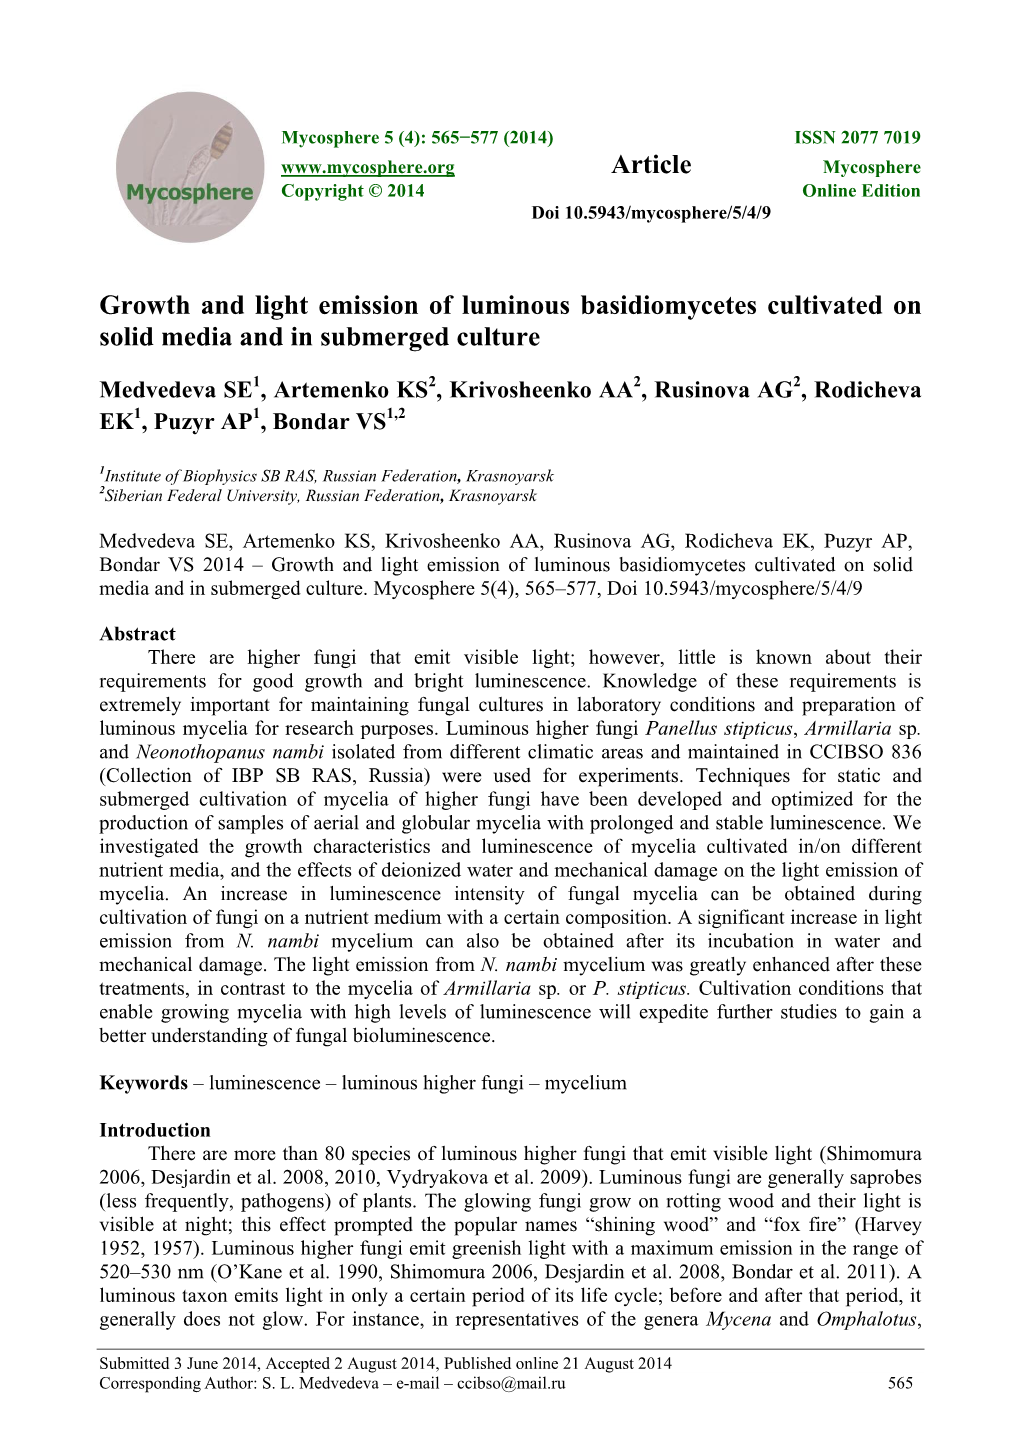 Growth and Light Emission of Luminous Basidiomycetes Cultivated on Solid Media and in Submerged Culture